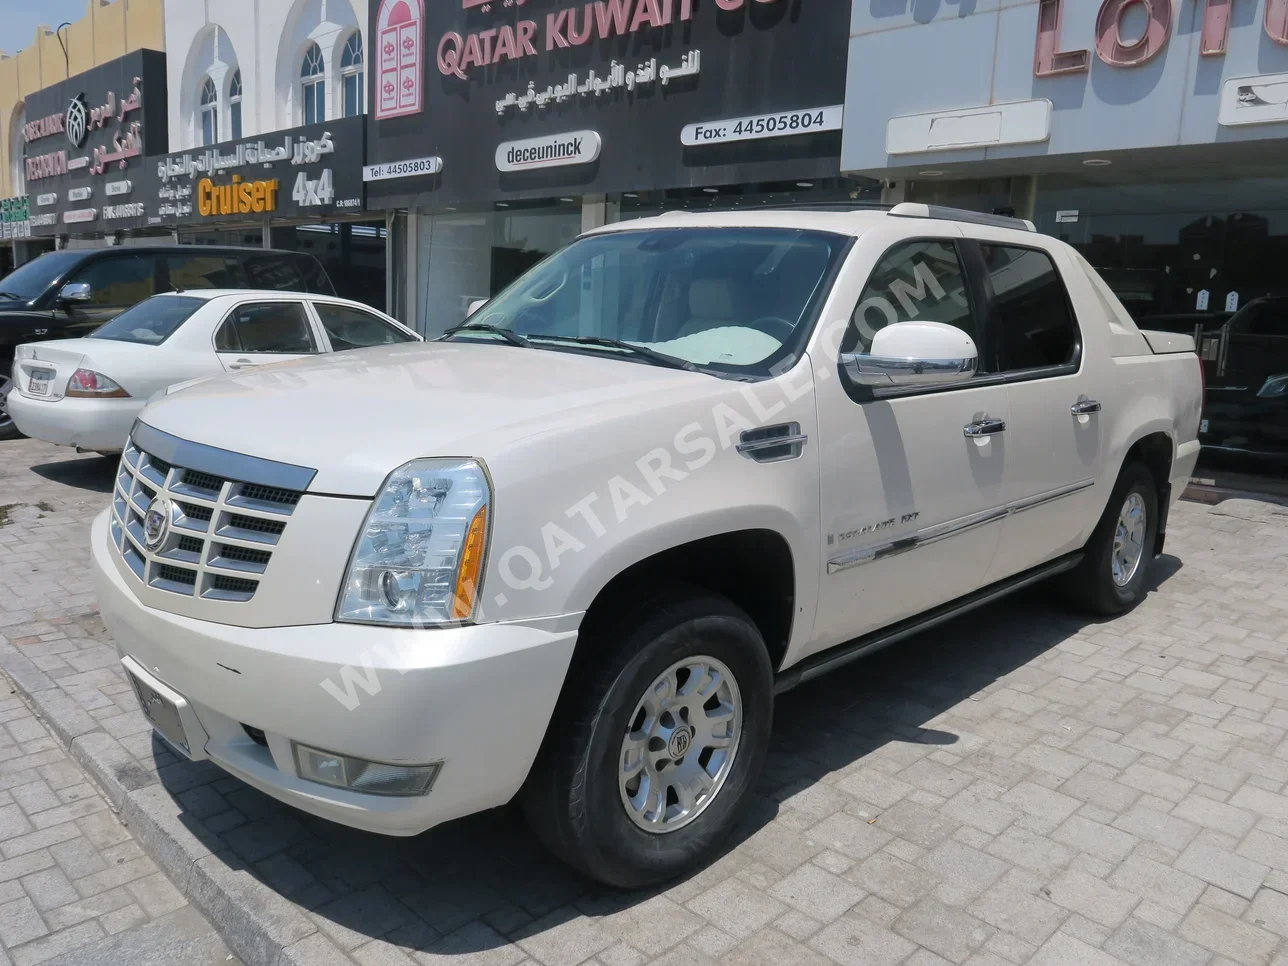 Cadillac  Escalade  2008  Automatic  170,000 Km  8 Cylinder  Four Wheel Drive (4WD)  SUV  White